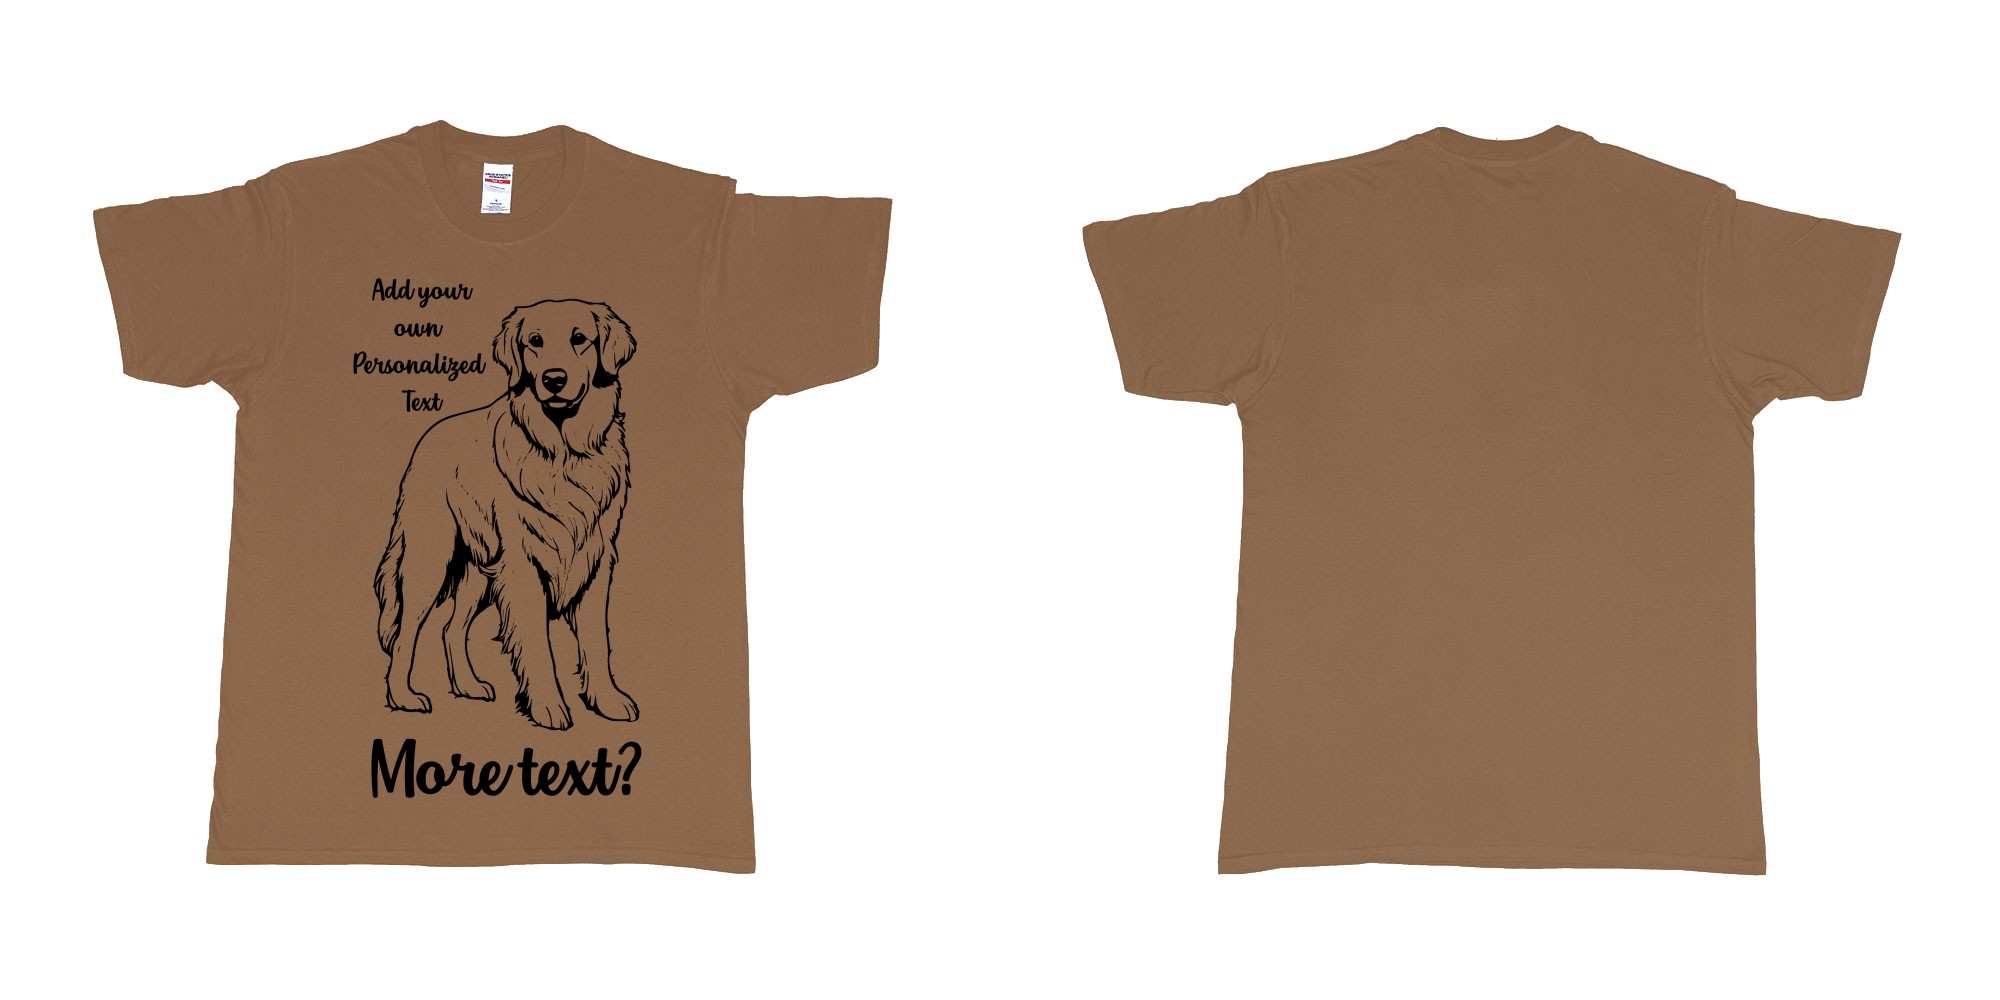 Custom tshirt design golden retriever dog breed personalized text in fabric color chestnut choice your own text made in Bali by The Pirate Way